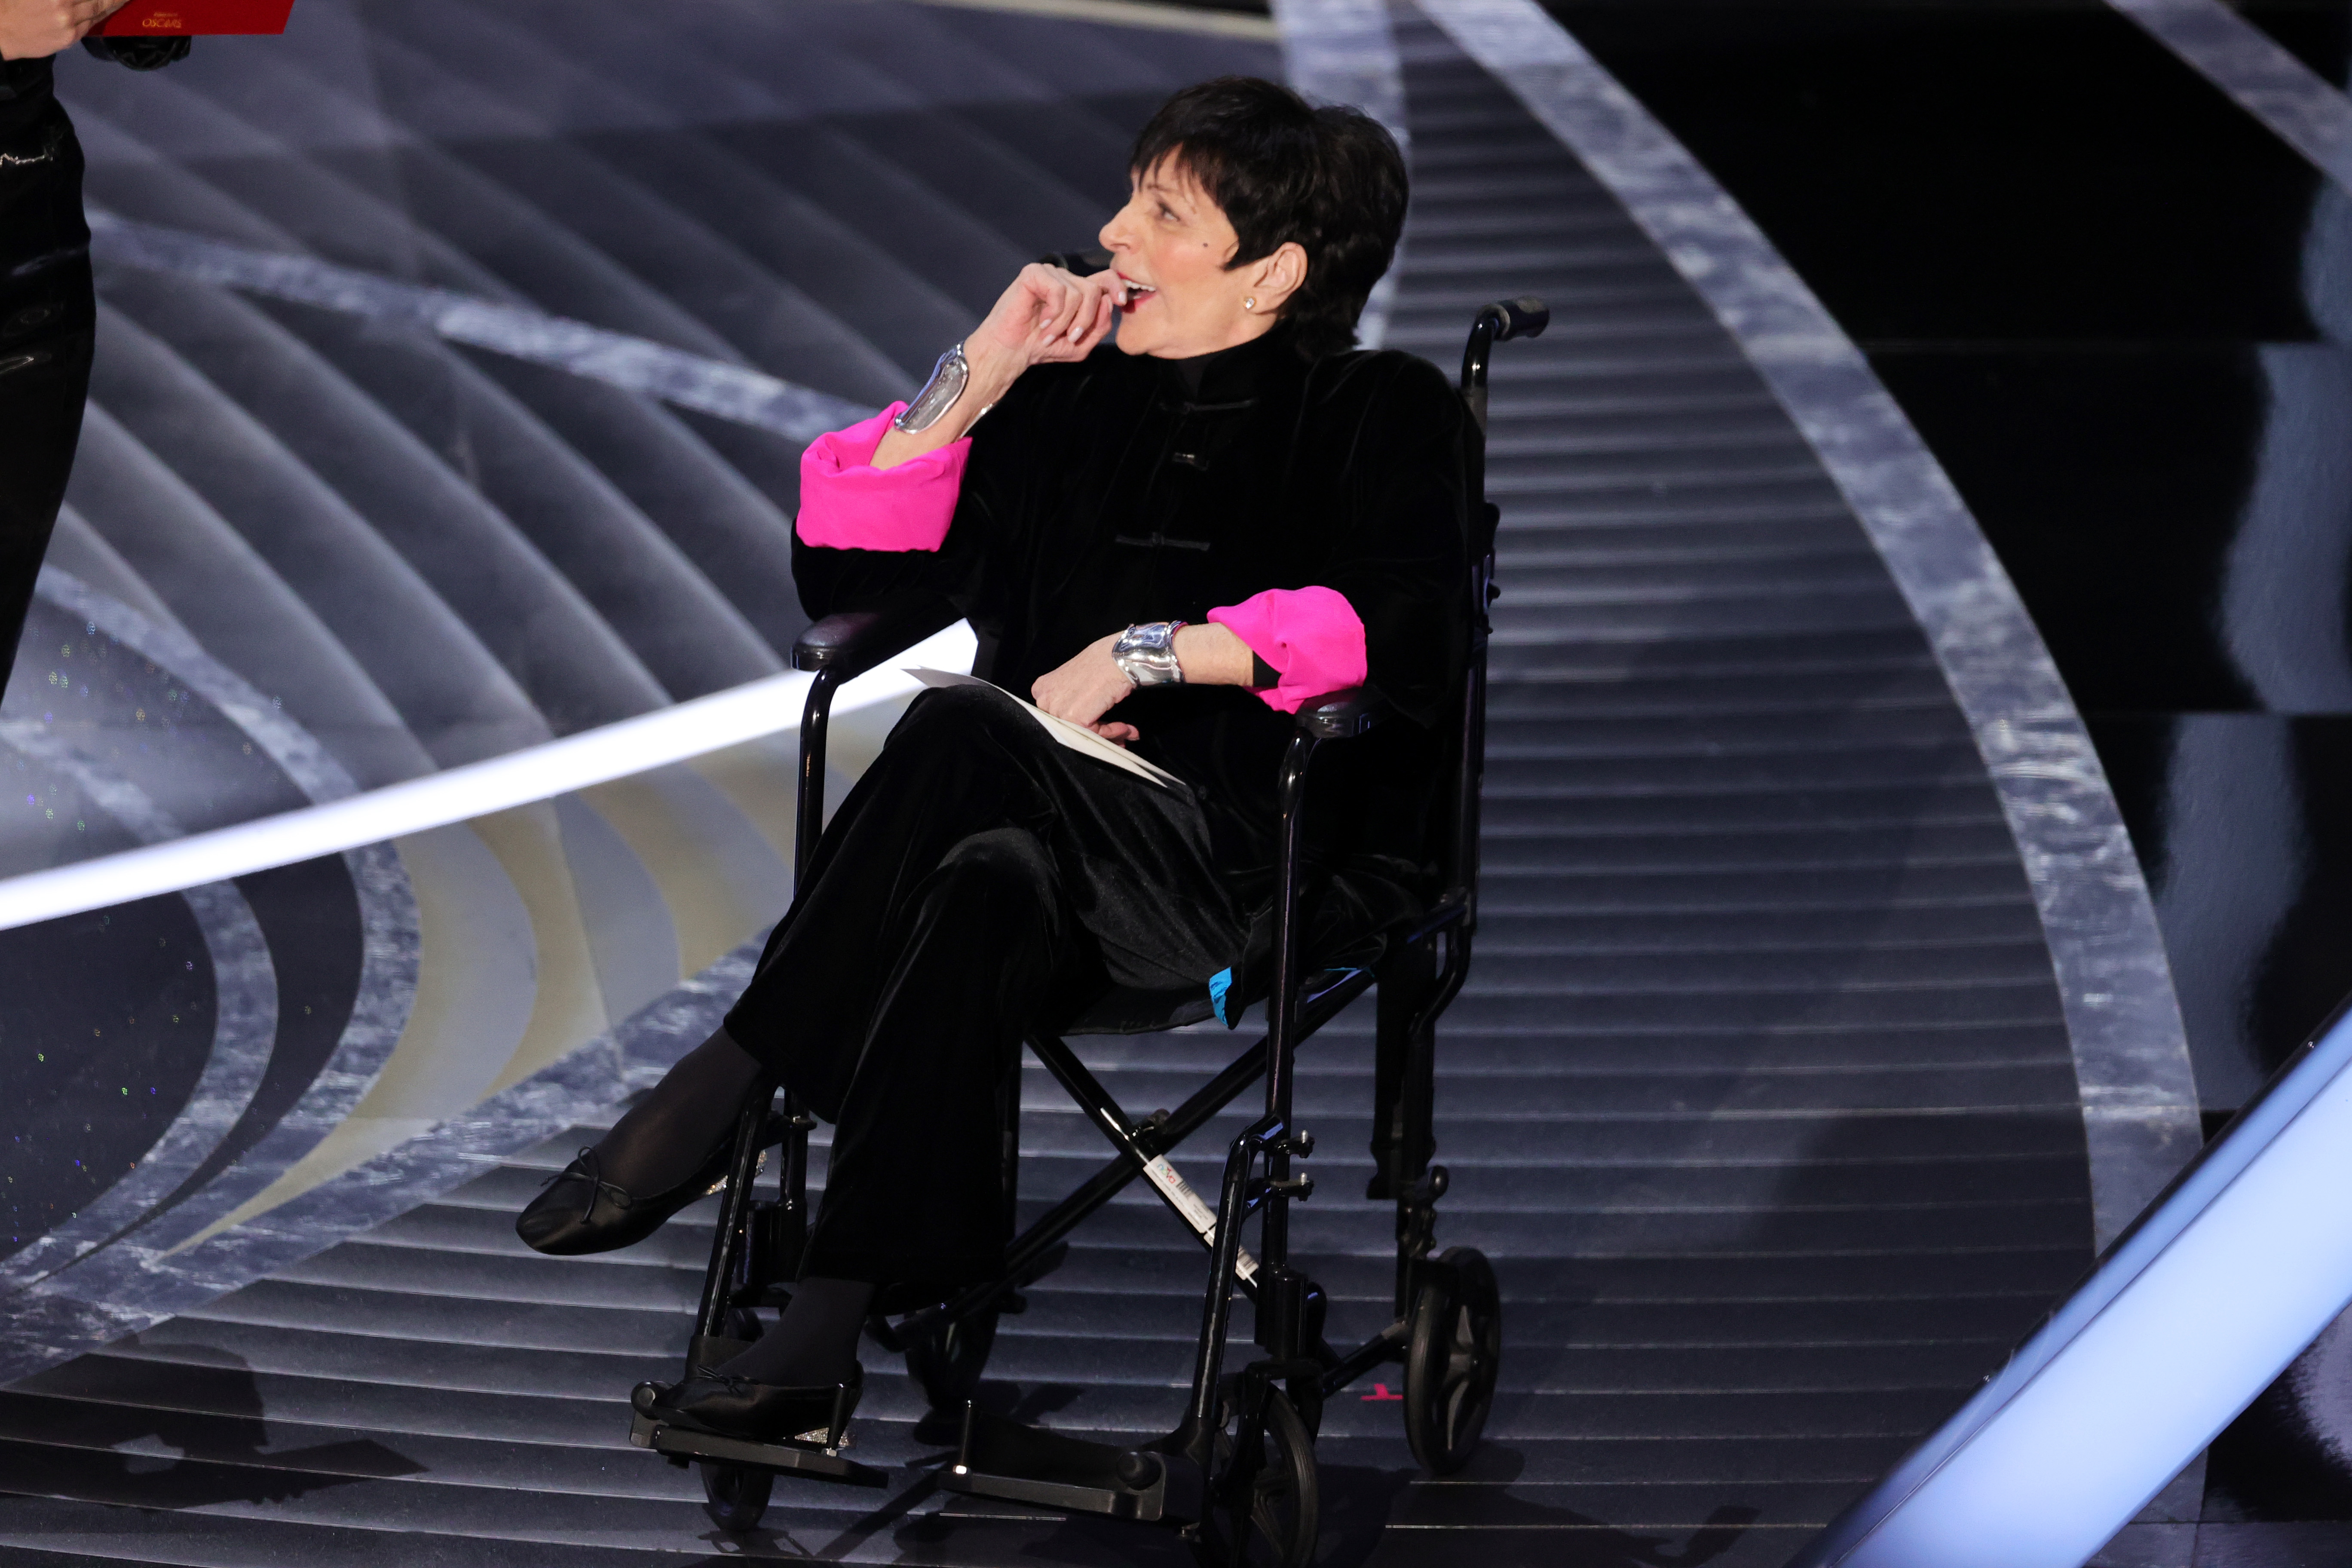 Liza Minnelli in a wheelchair at the 94th Annual Academy Awards at Dolby Theatre on March 27, 2022, in Hollywood, California. | Source: Getty Images